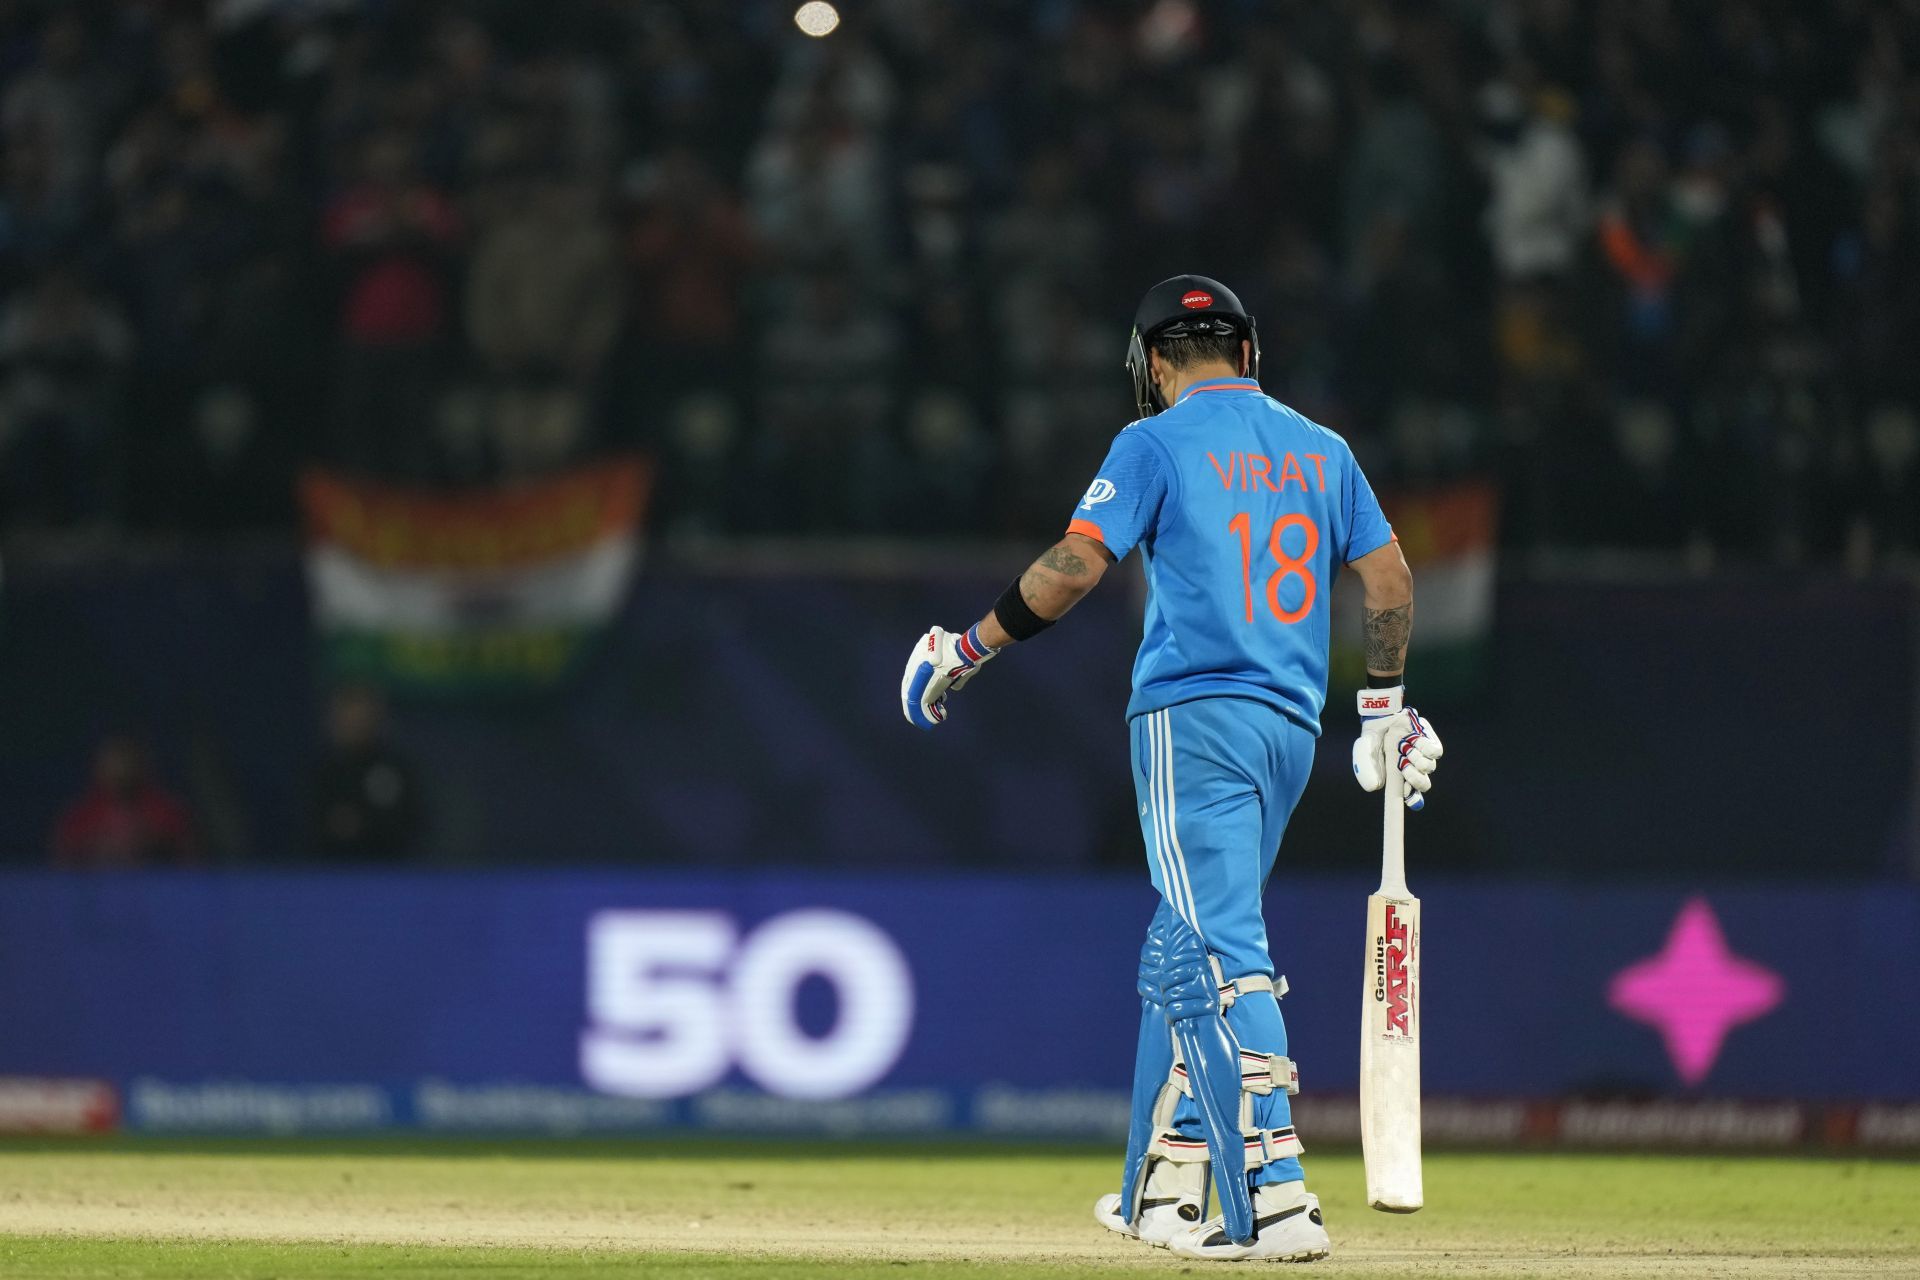 Virat Kohli has been one of the best batters in the ongoing World Cup